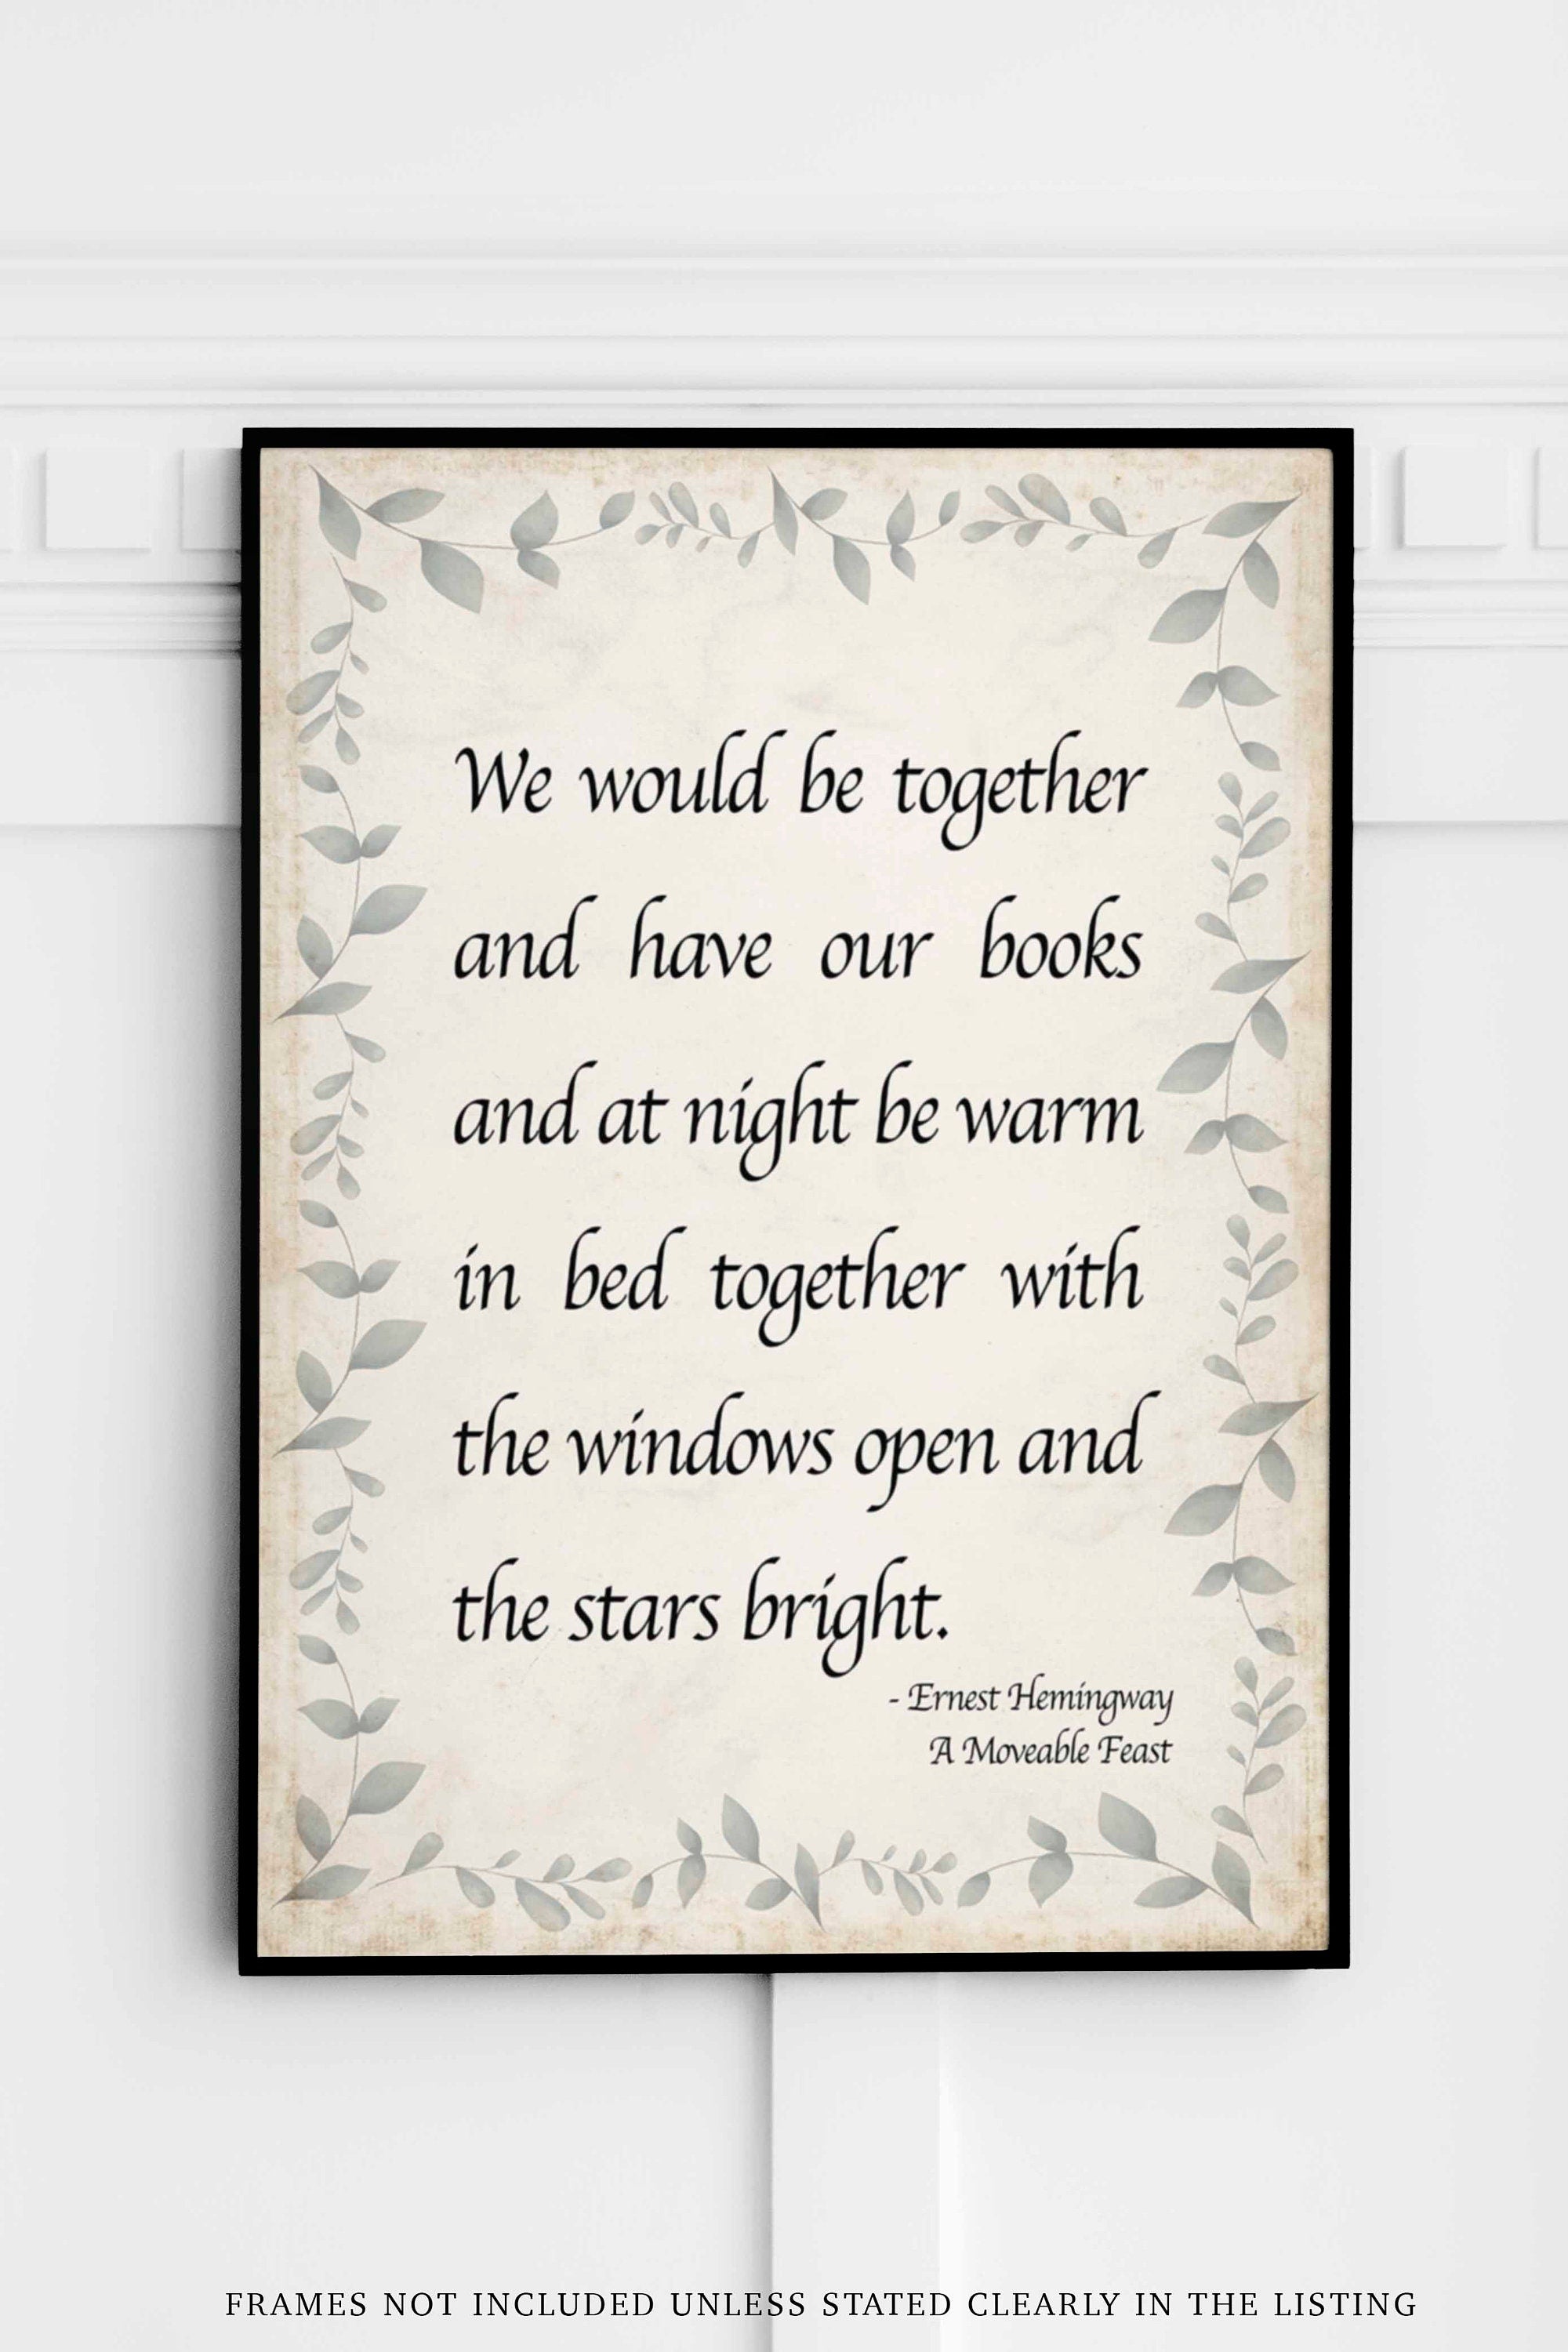 Ernest Hemingway Quote Print, We Would Be Together And Have Our Books - Romantic Art Print